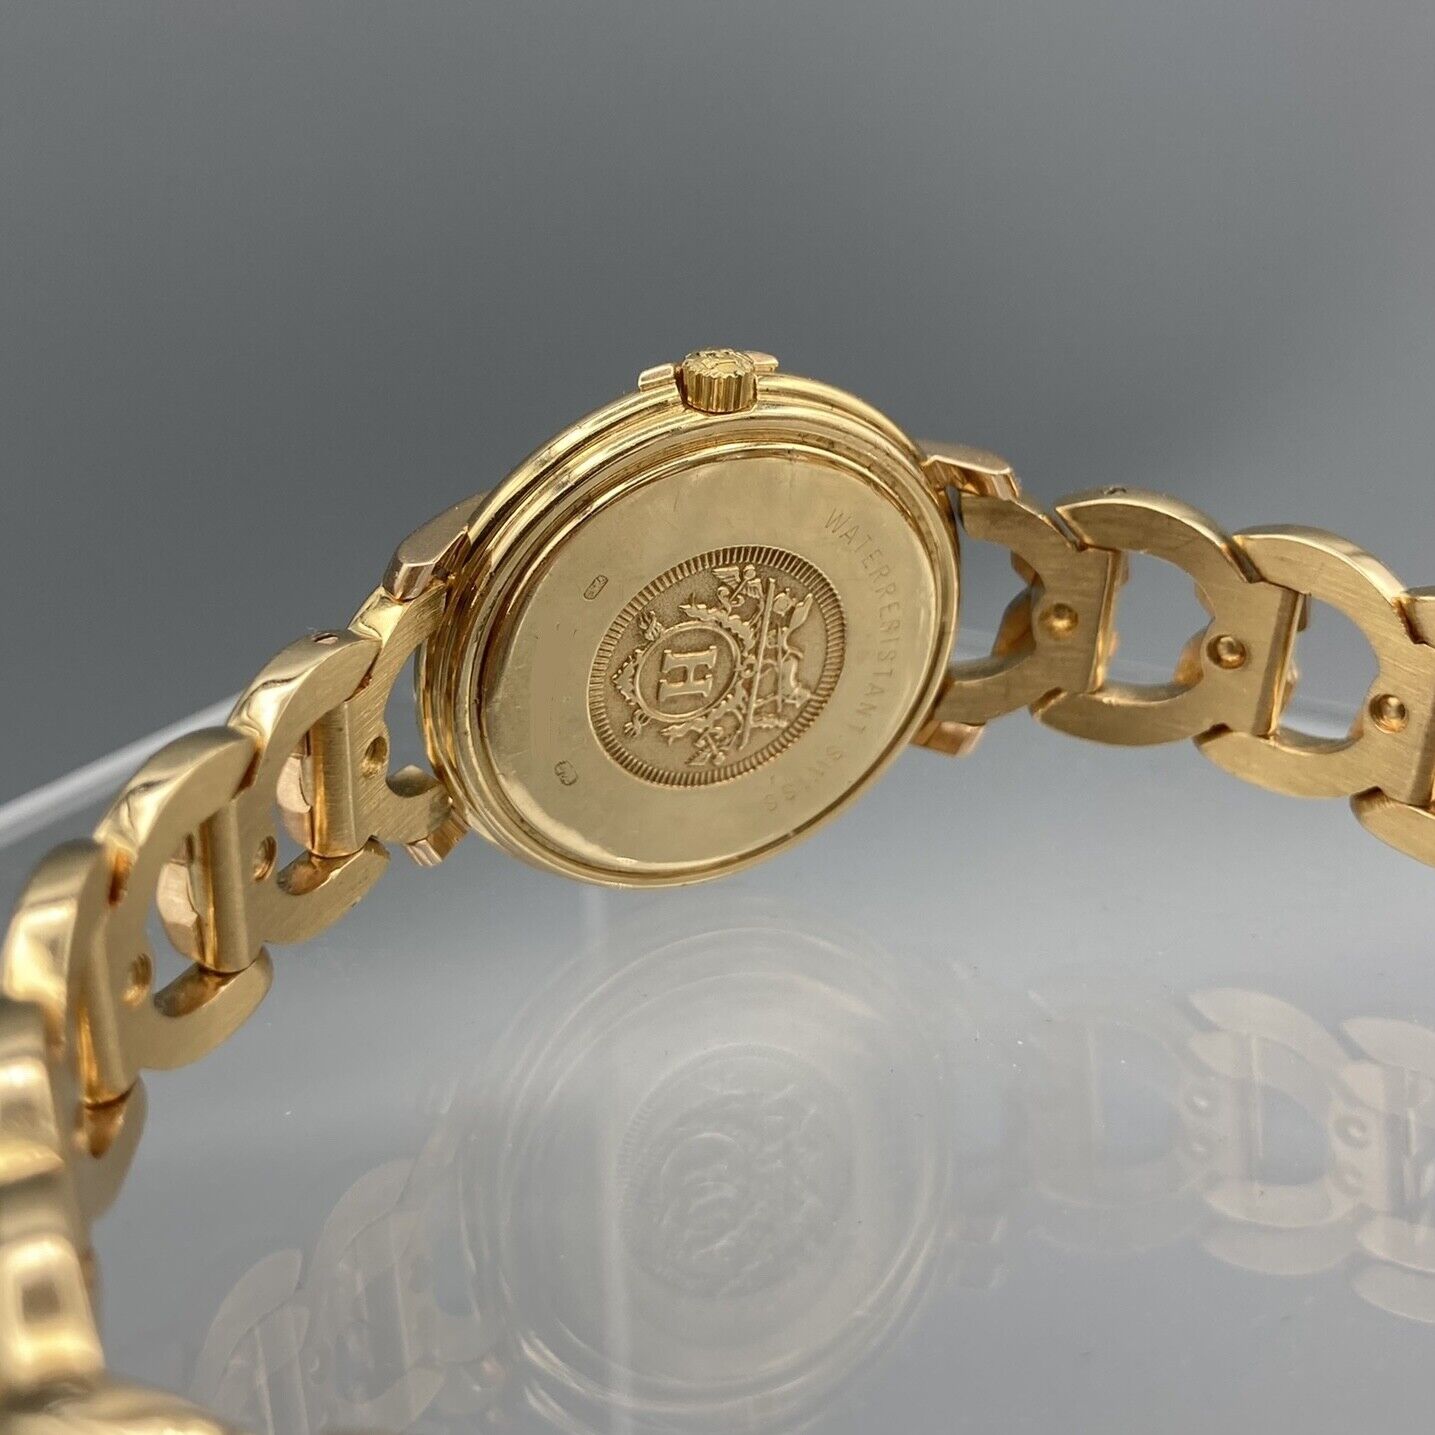 Hermes 18k Yellow and Rose Gold Ruban Watch